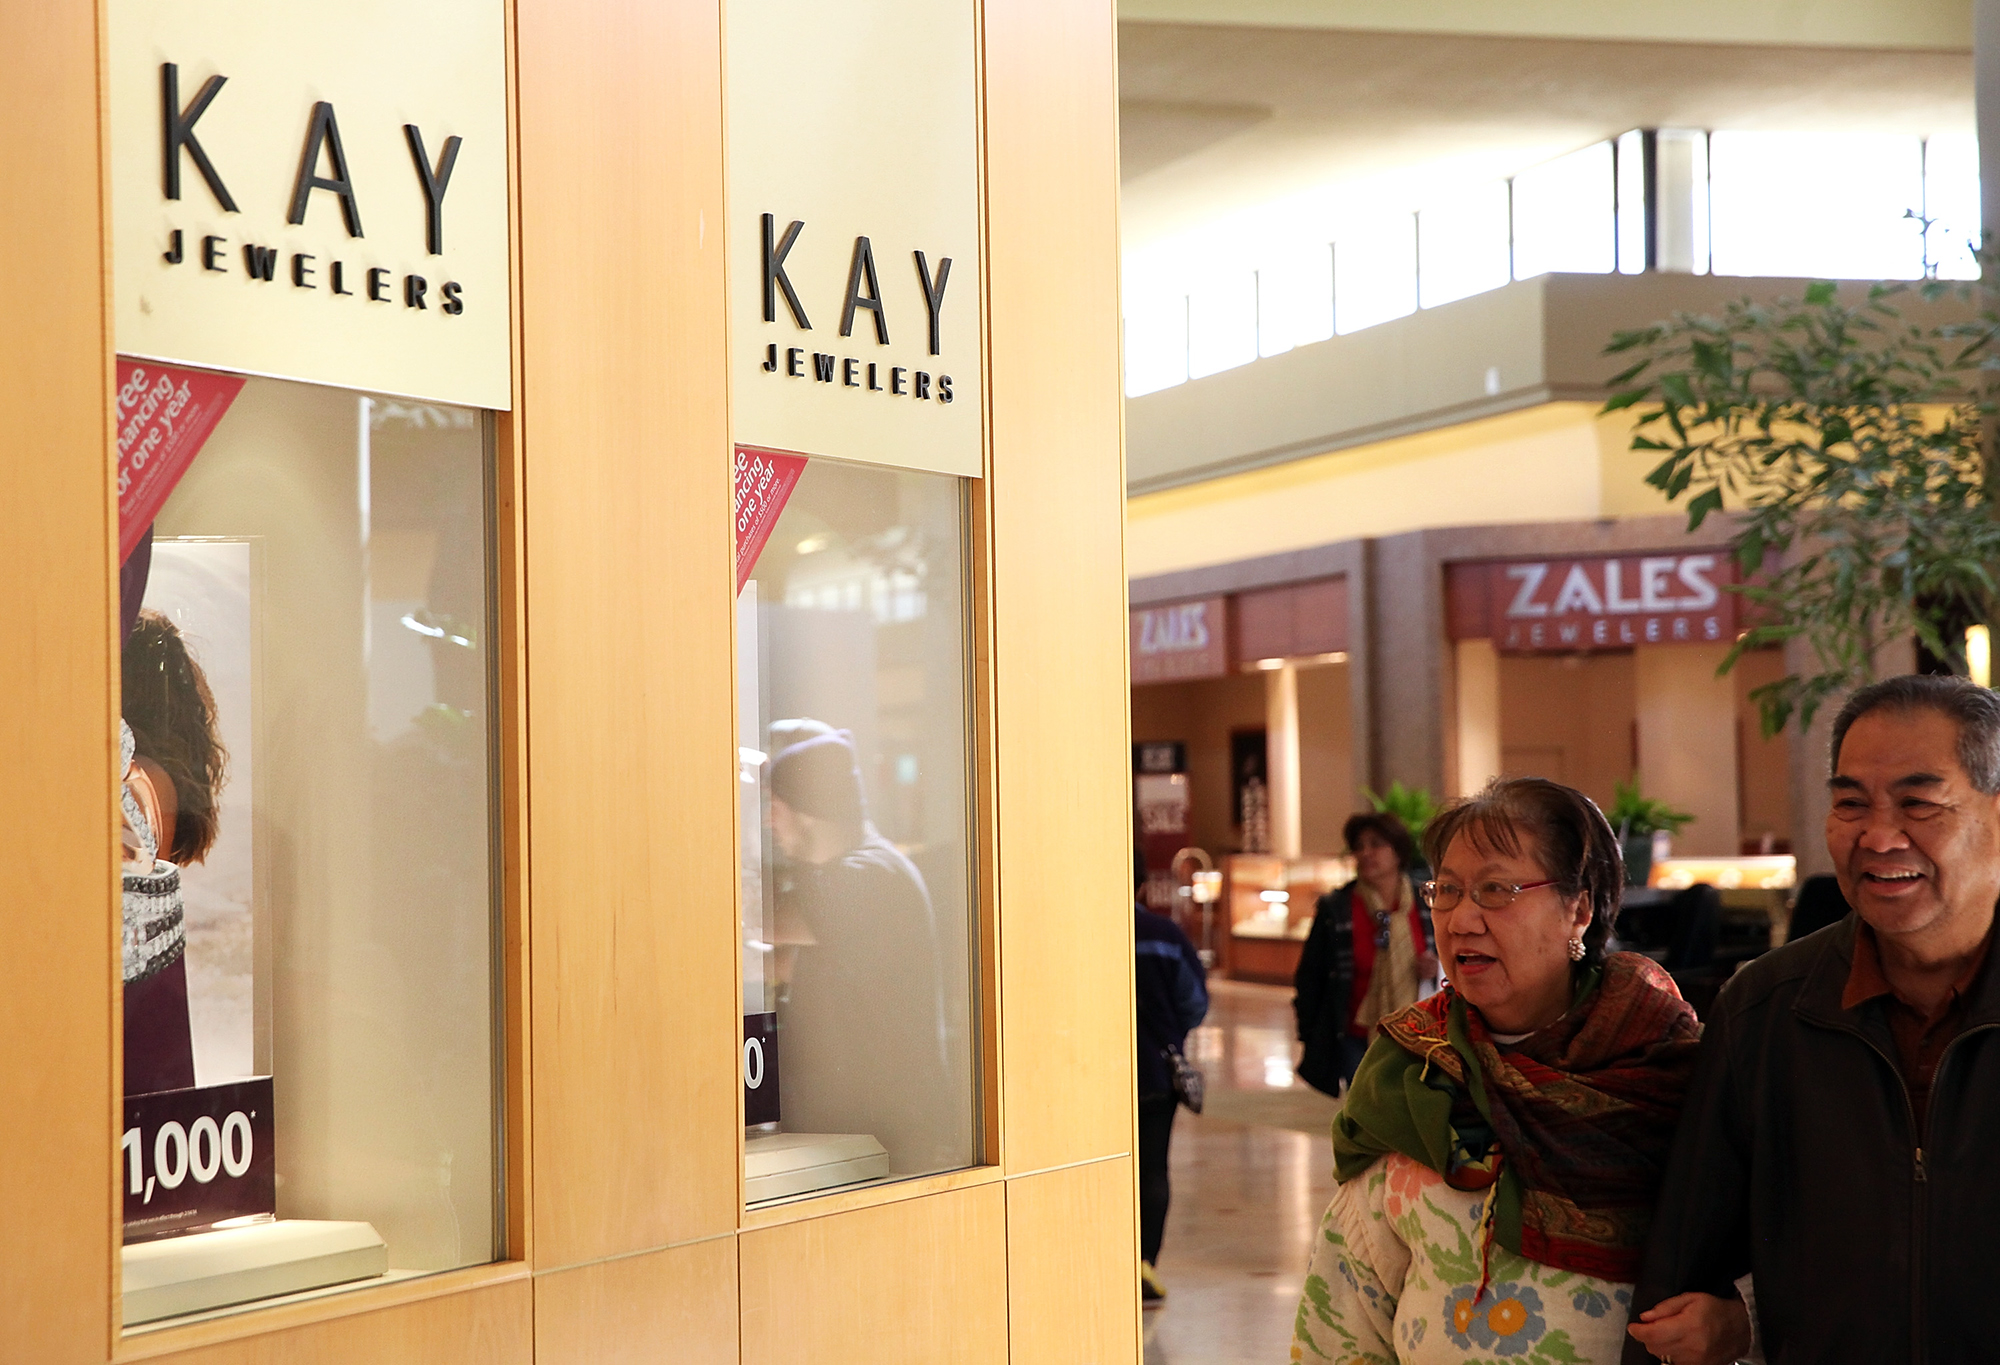 A Kay Jewelers store, on Feb. 19, 2014 in Daly City, Calif.